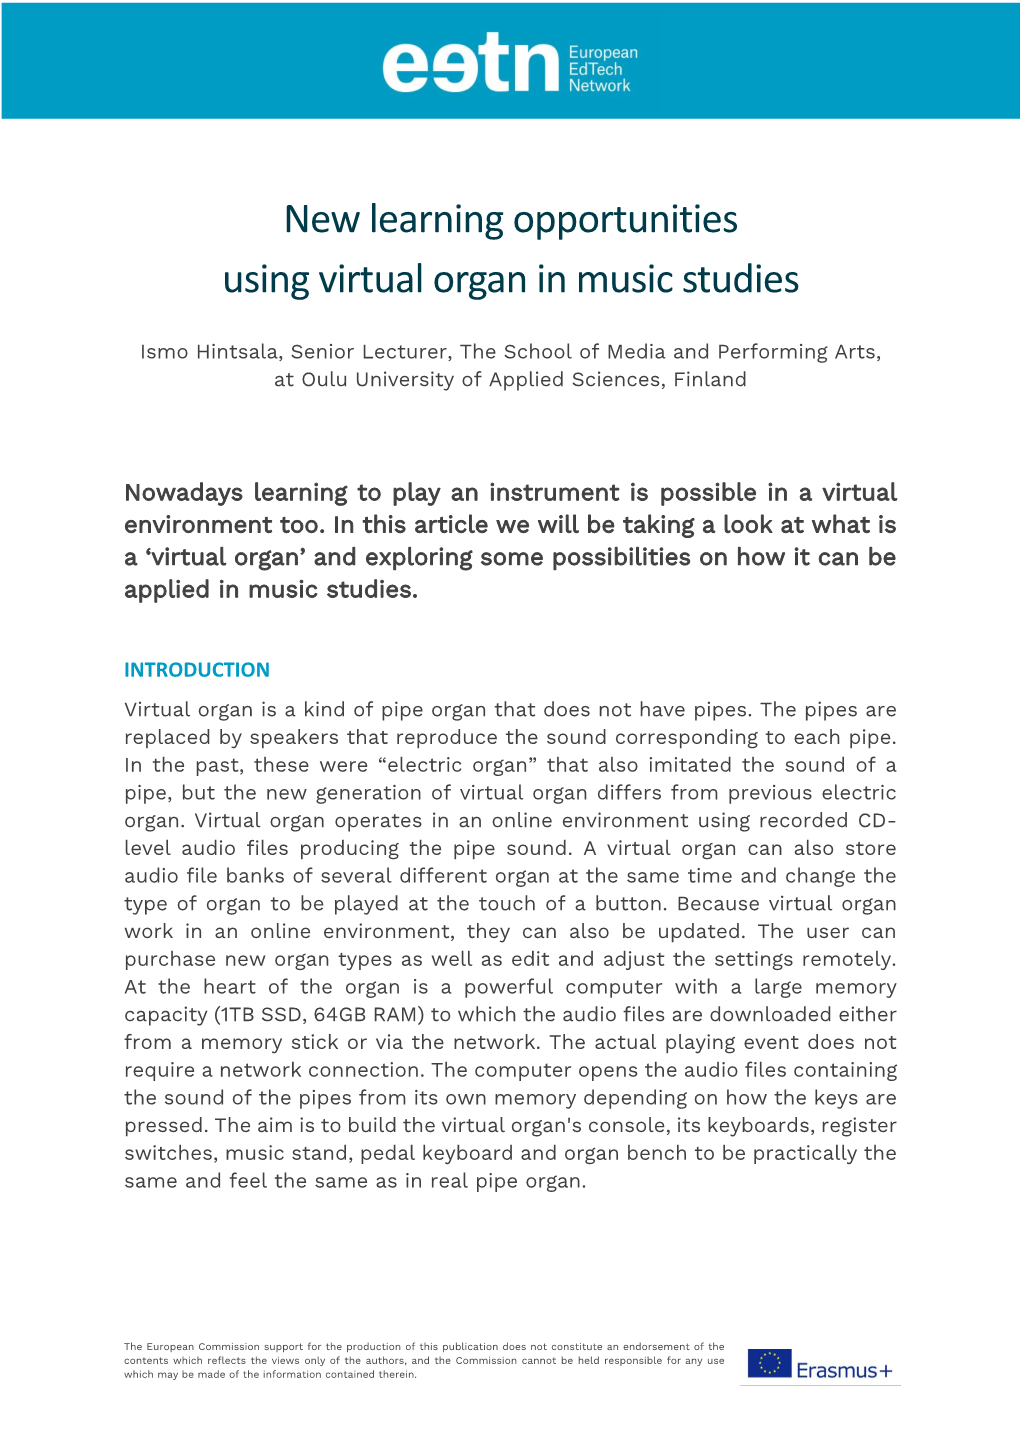 New Learning Opportunities Using Virtual Organ in Music Studies